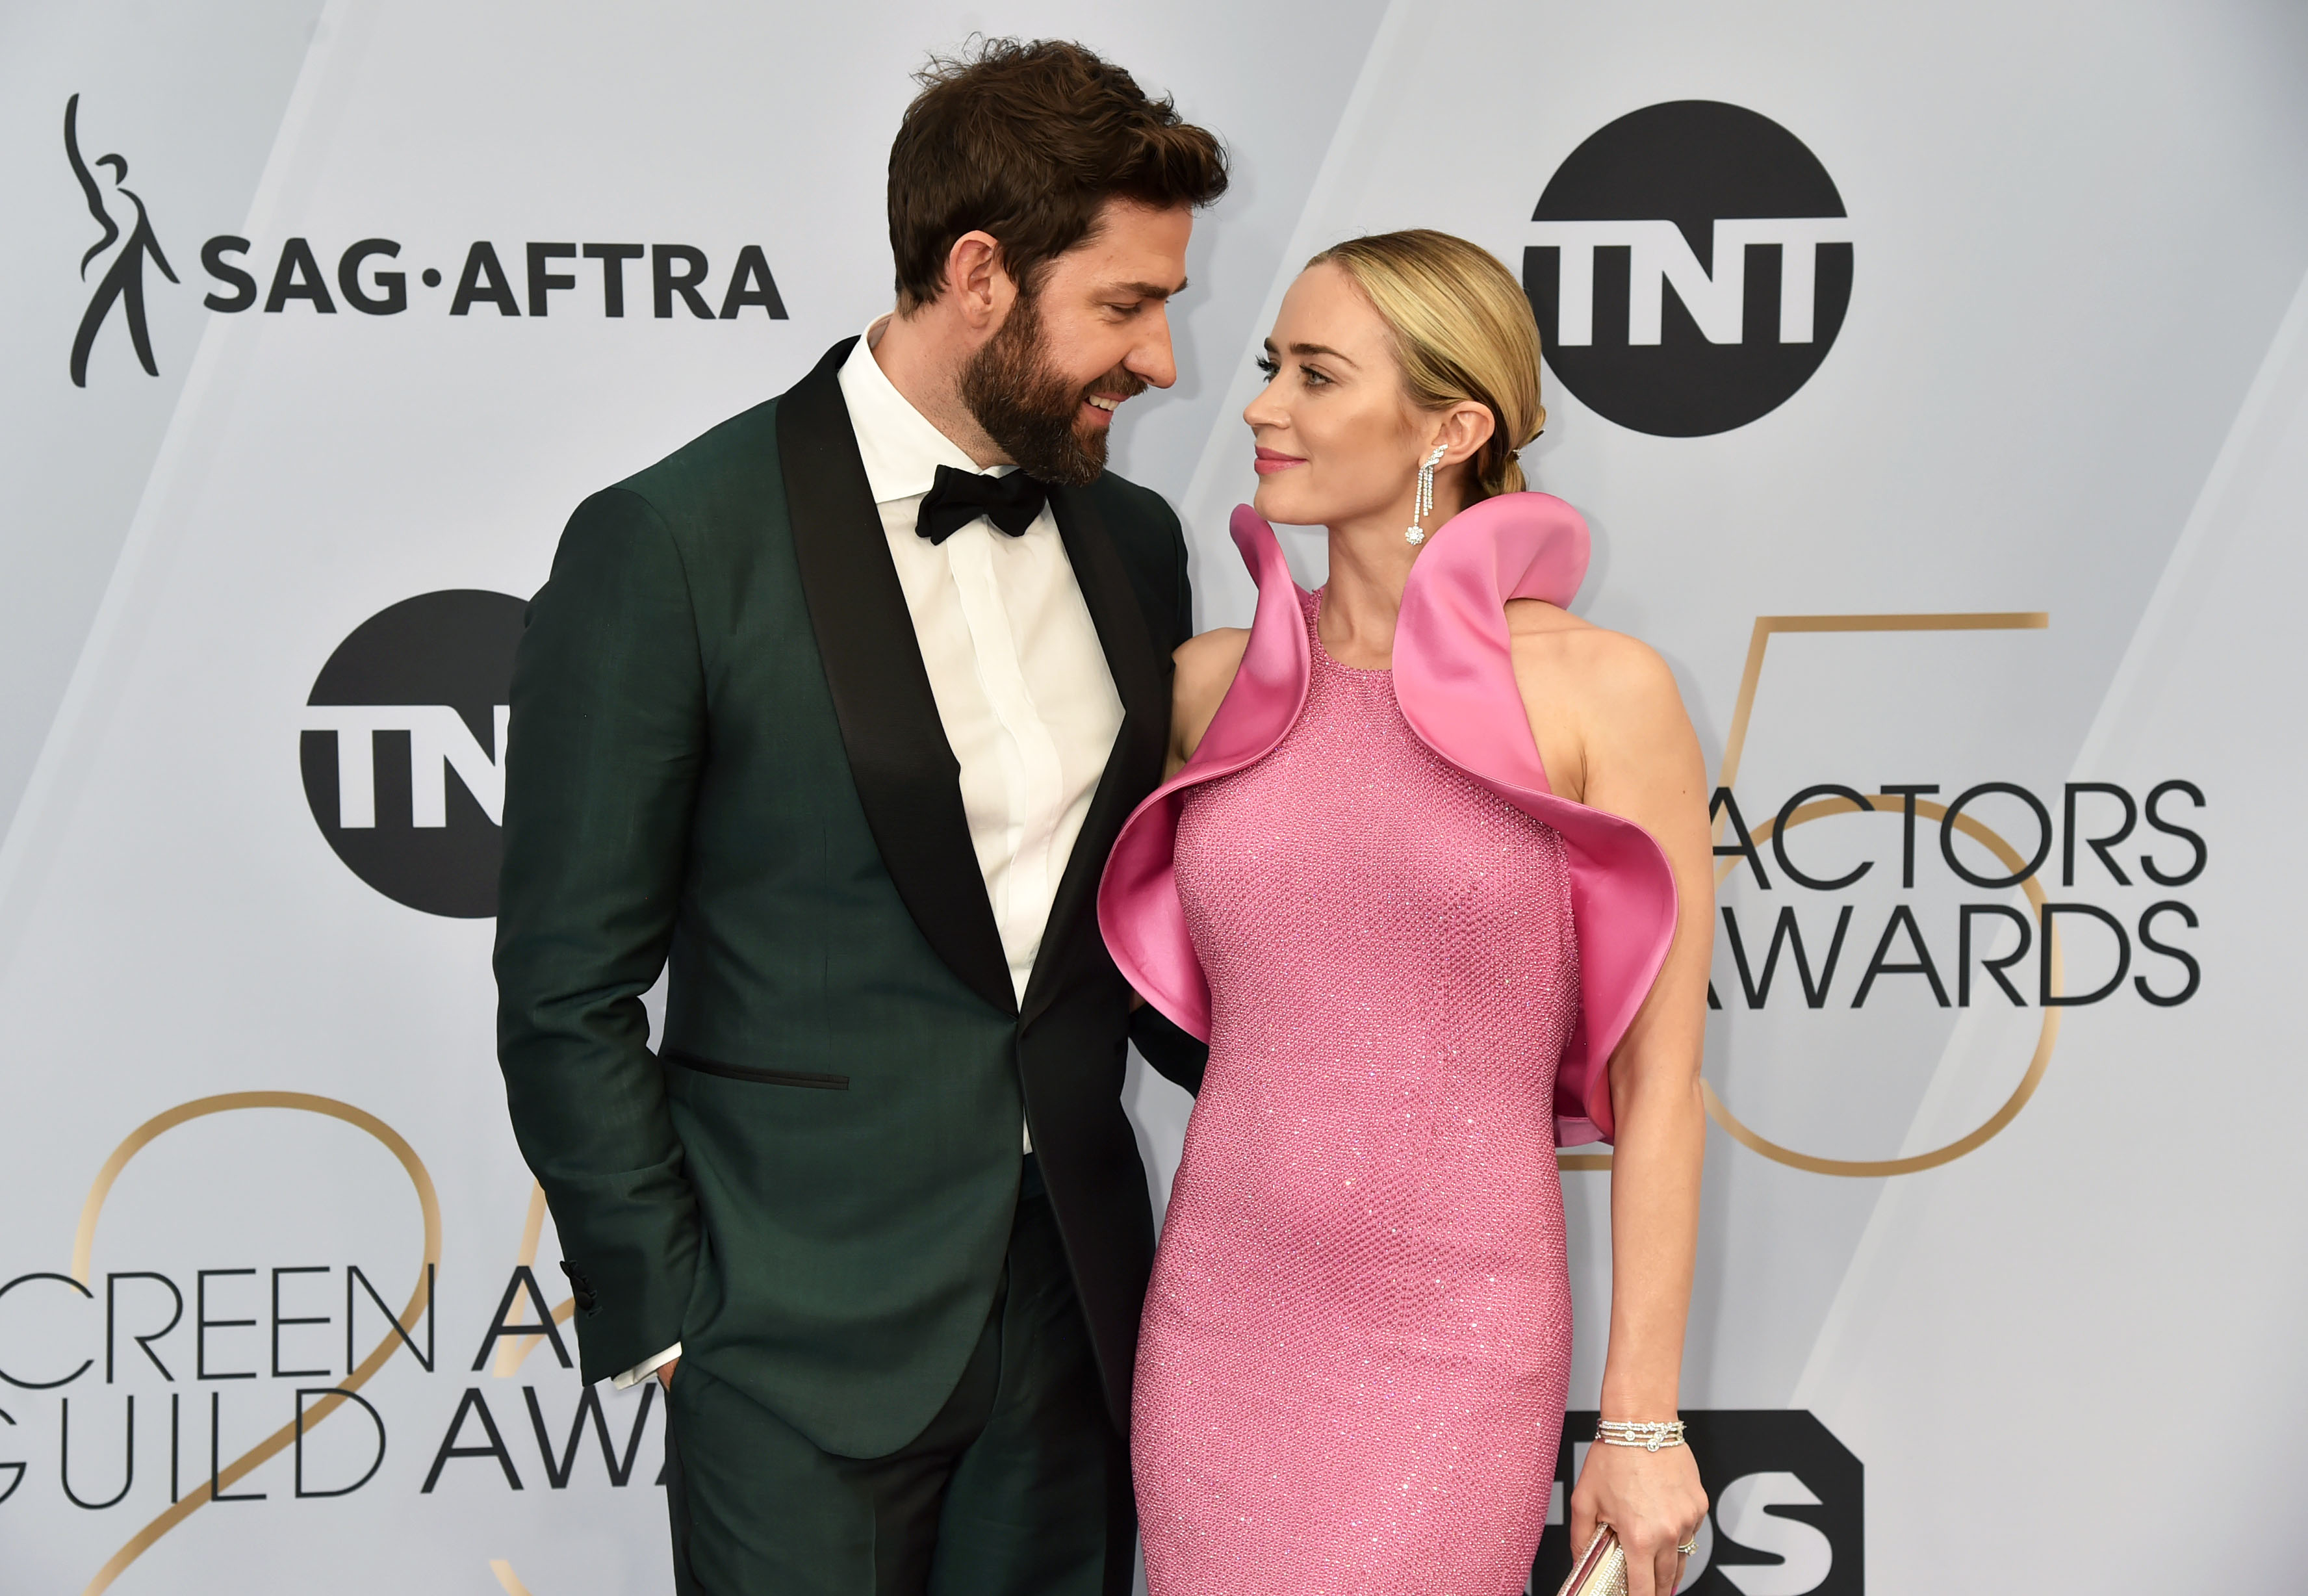 John and Emily look into each others eyes during an award ceremony red carpet